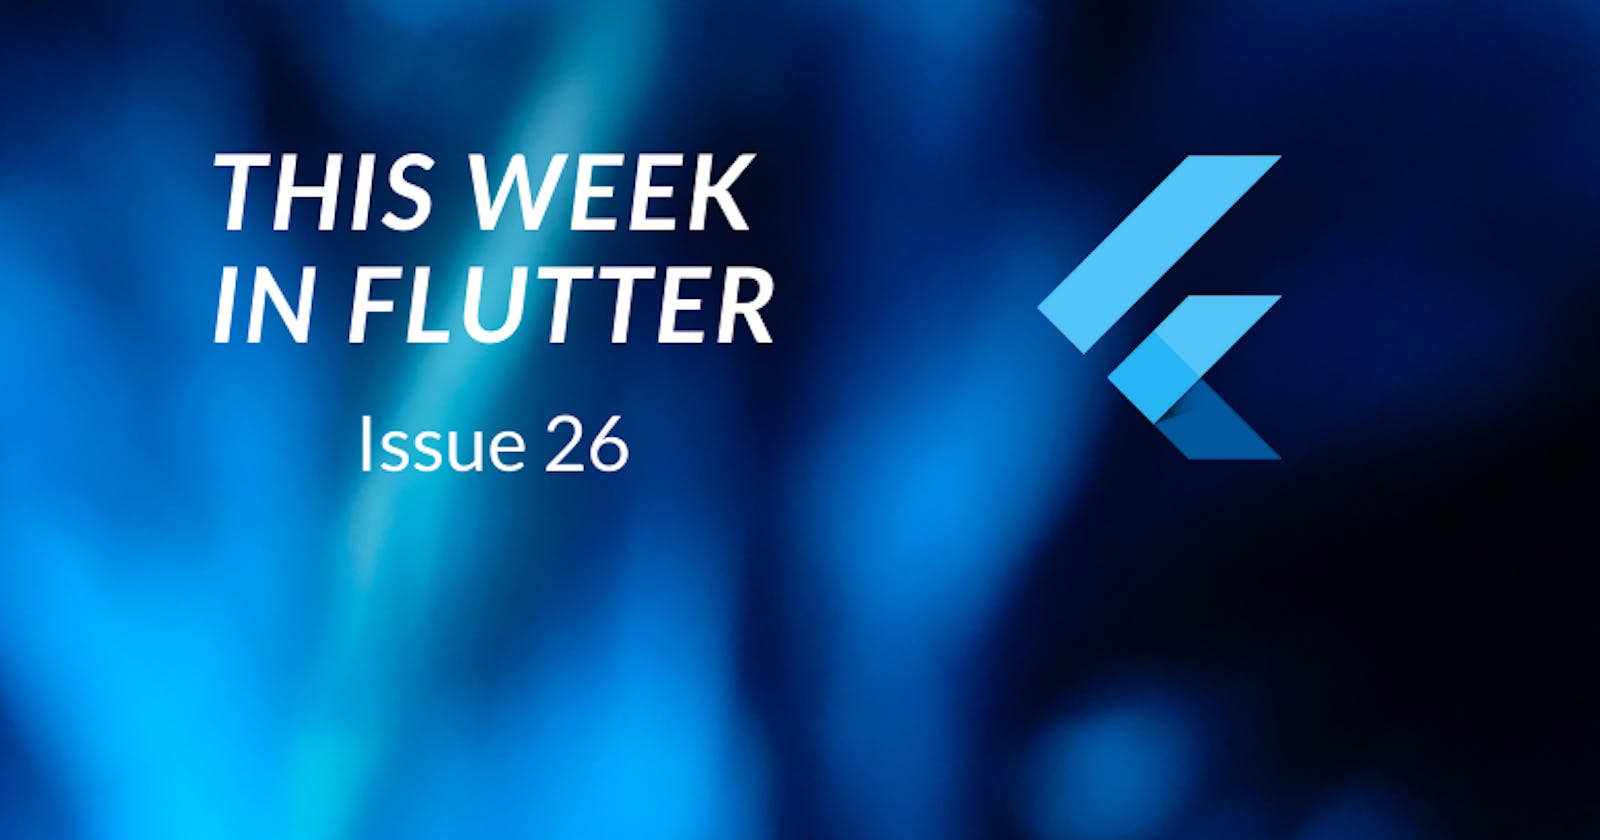 This week in Flutter #26